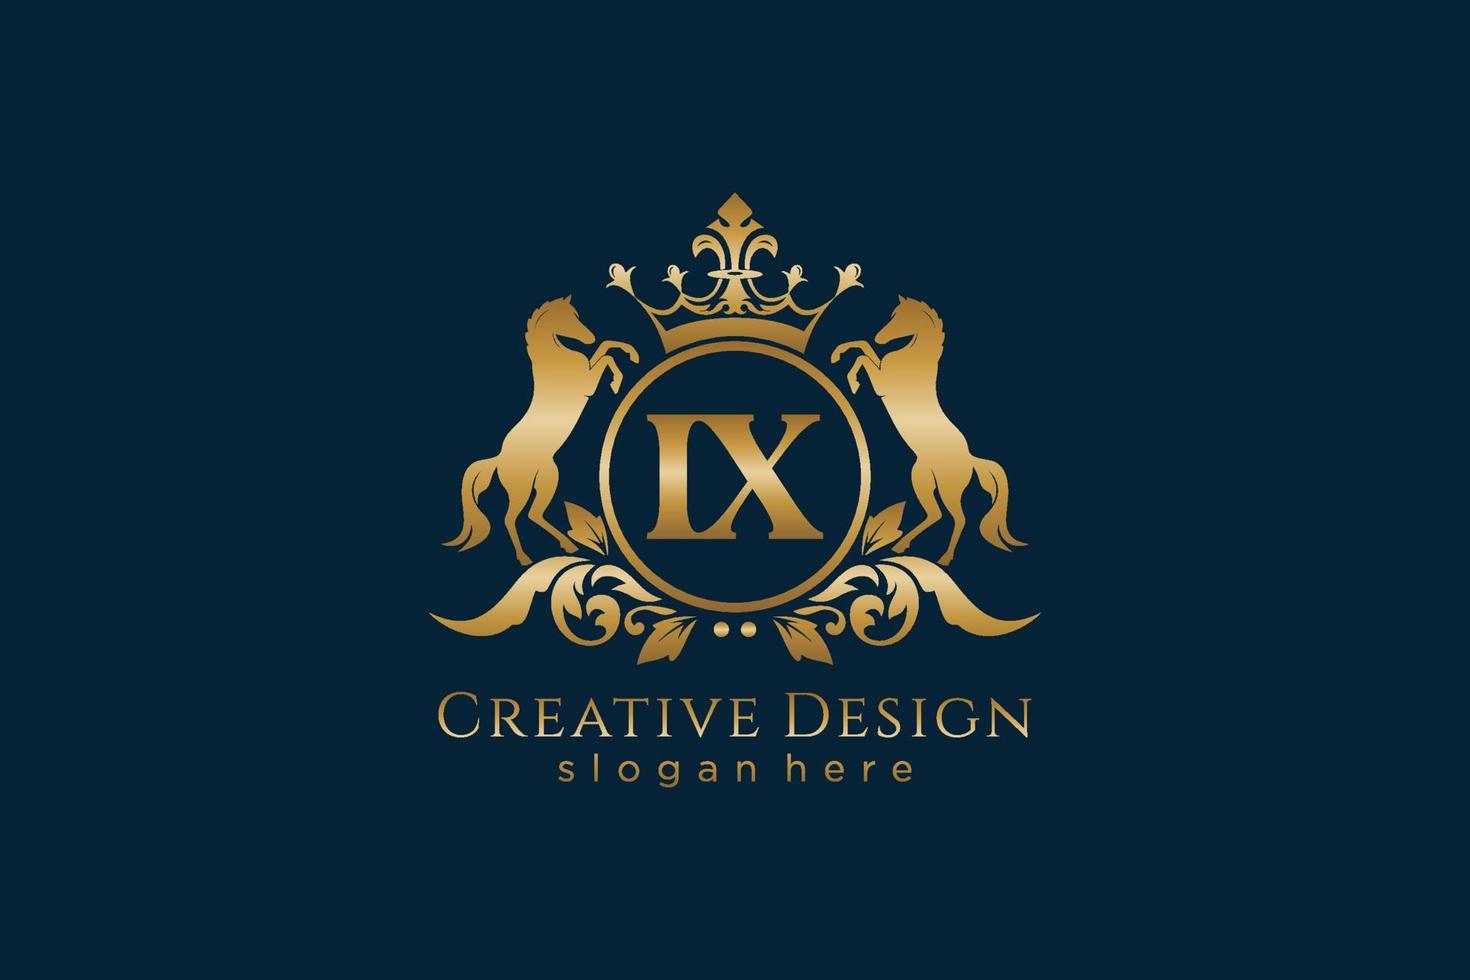 initial IX Retro golden crest with circle and two horses, badge template with scrolls and royal crown - perfect for luxurious branding projects vector